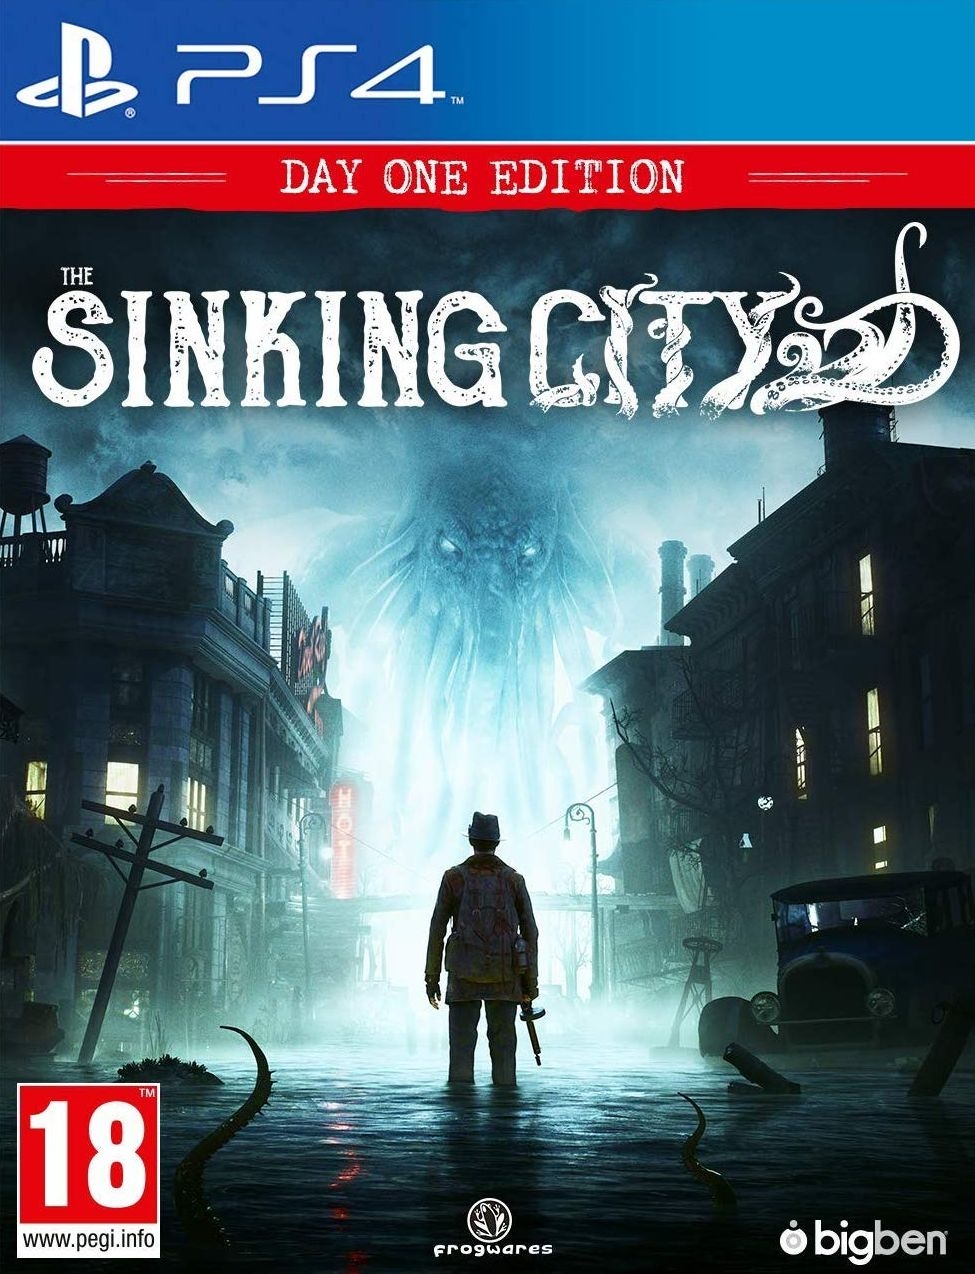 PS4 The Sinking City Day One Edition